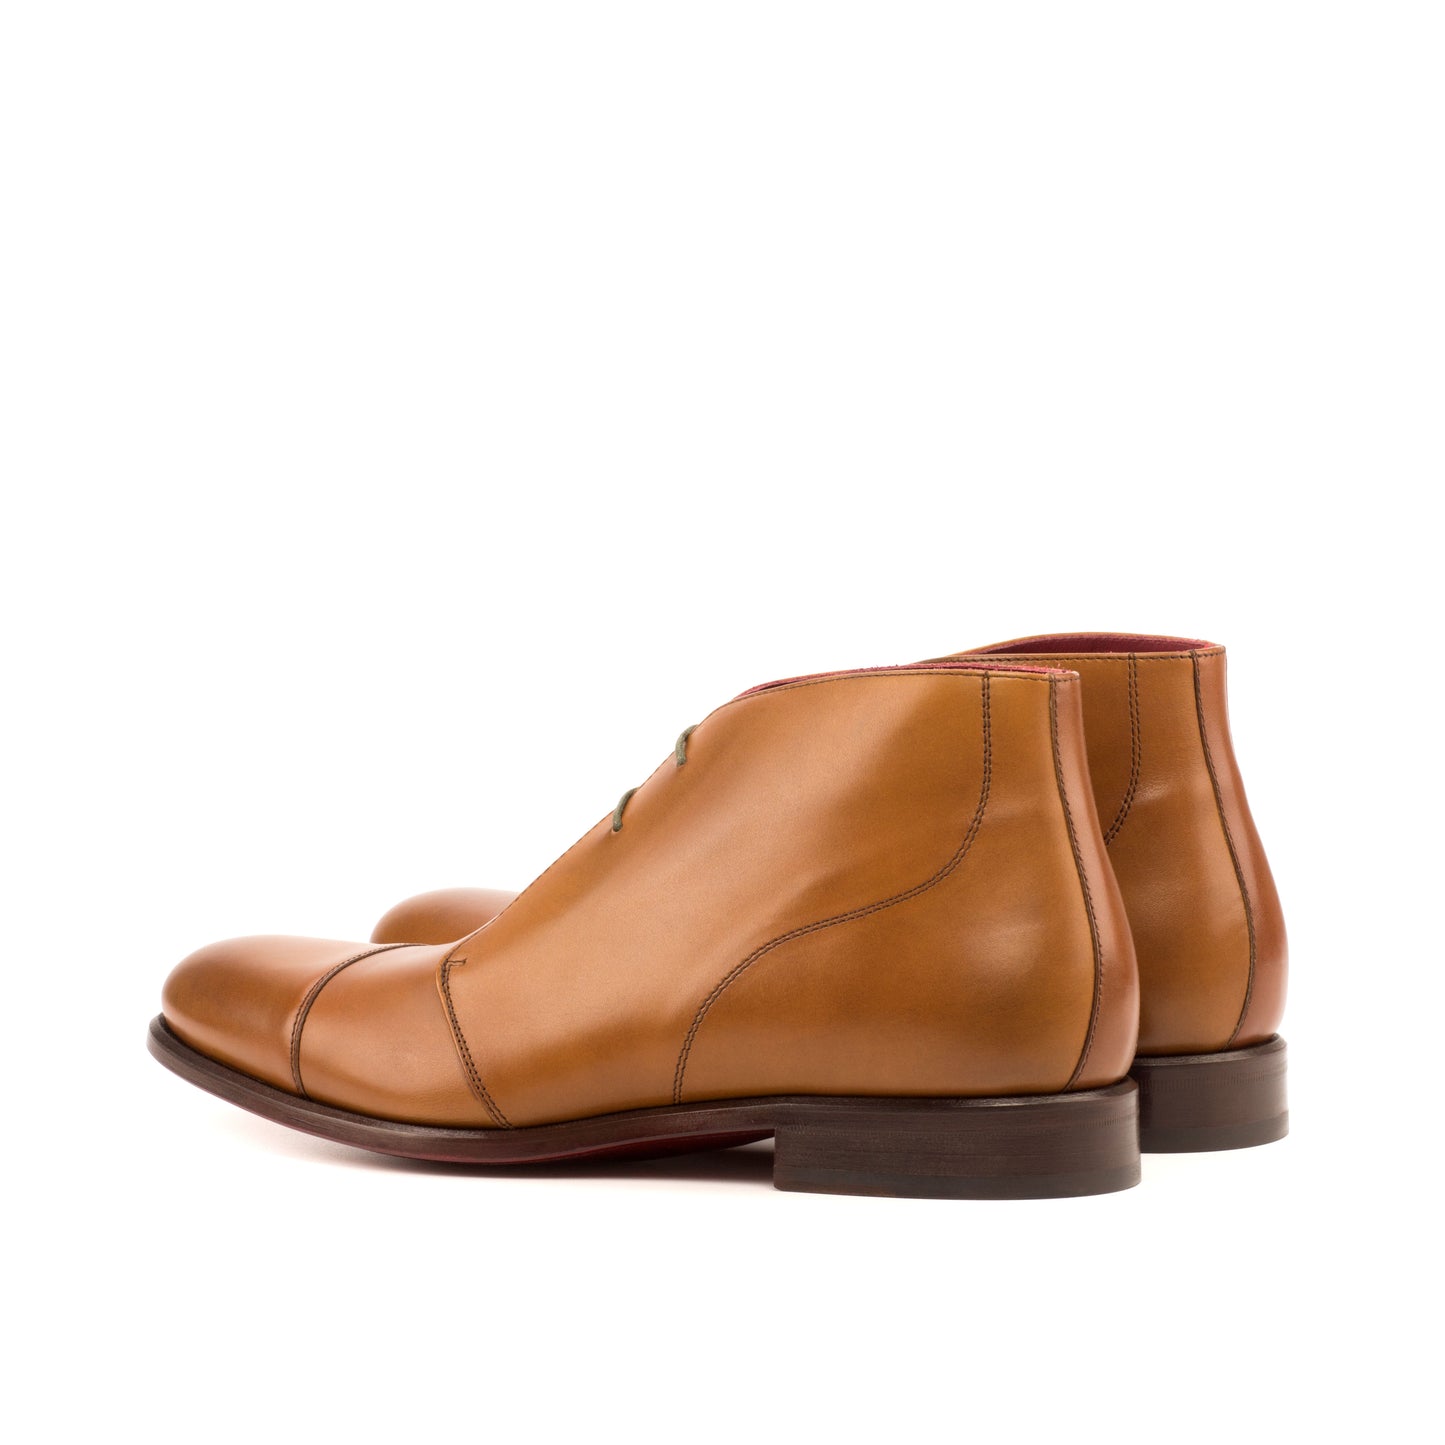 SUITCAFE Men's Chukka Boot Cognac Leather Red Soles